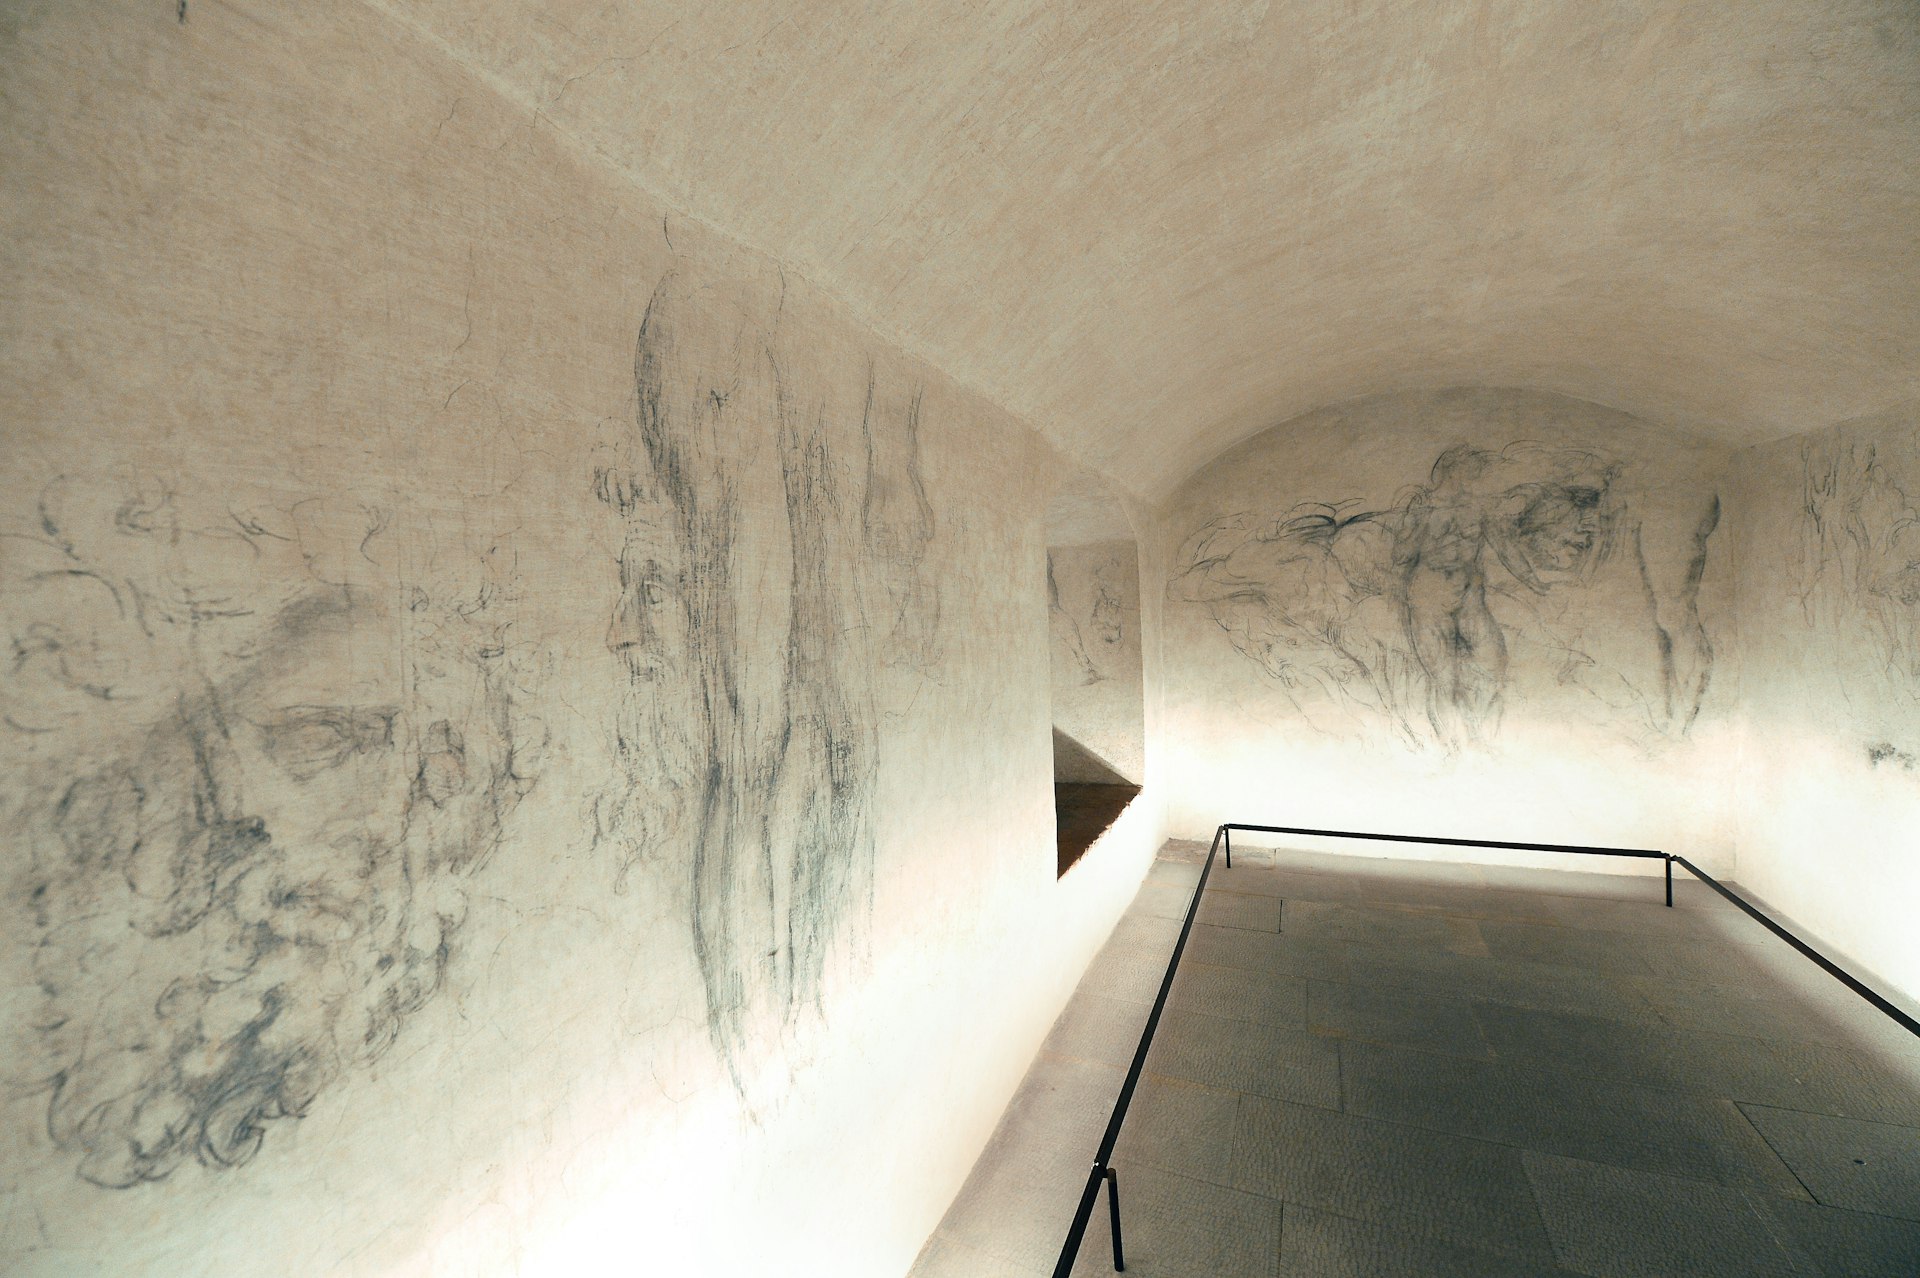 A general view of charcoal drawings inside "Michelangelo's Secret Room" at the Medici Chapel Museum